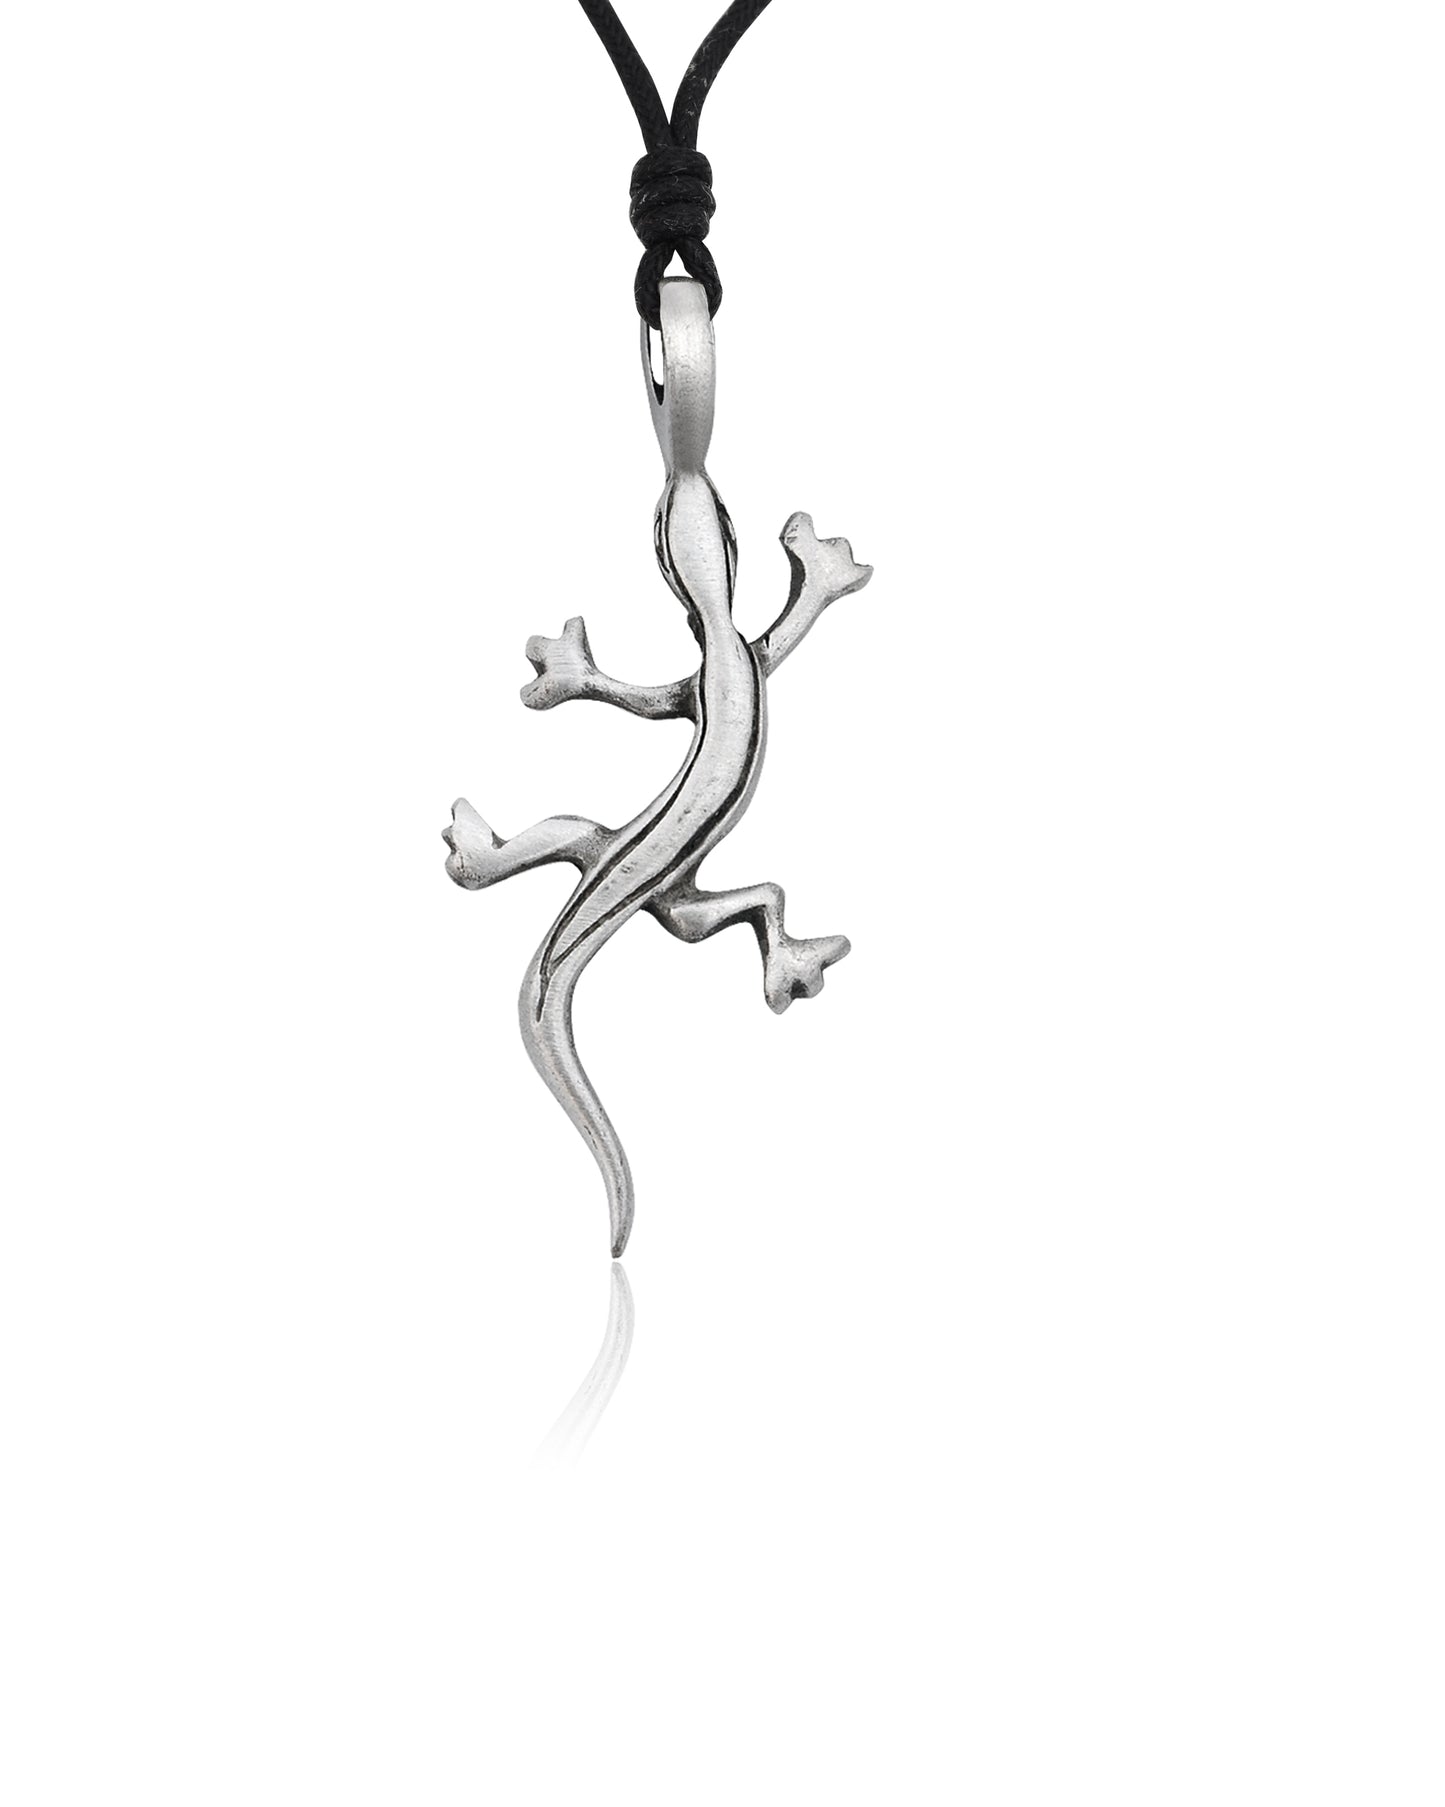 Lizard Reptile Silver Pewter Charm Necklace Pendant Jewelry